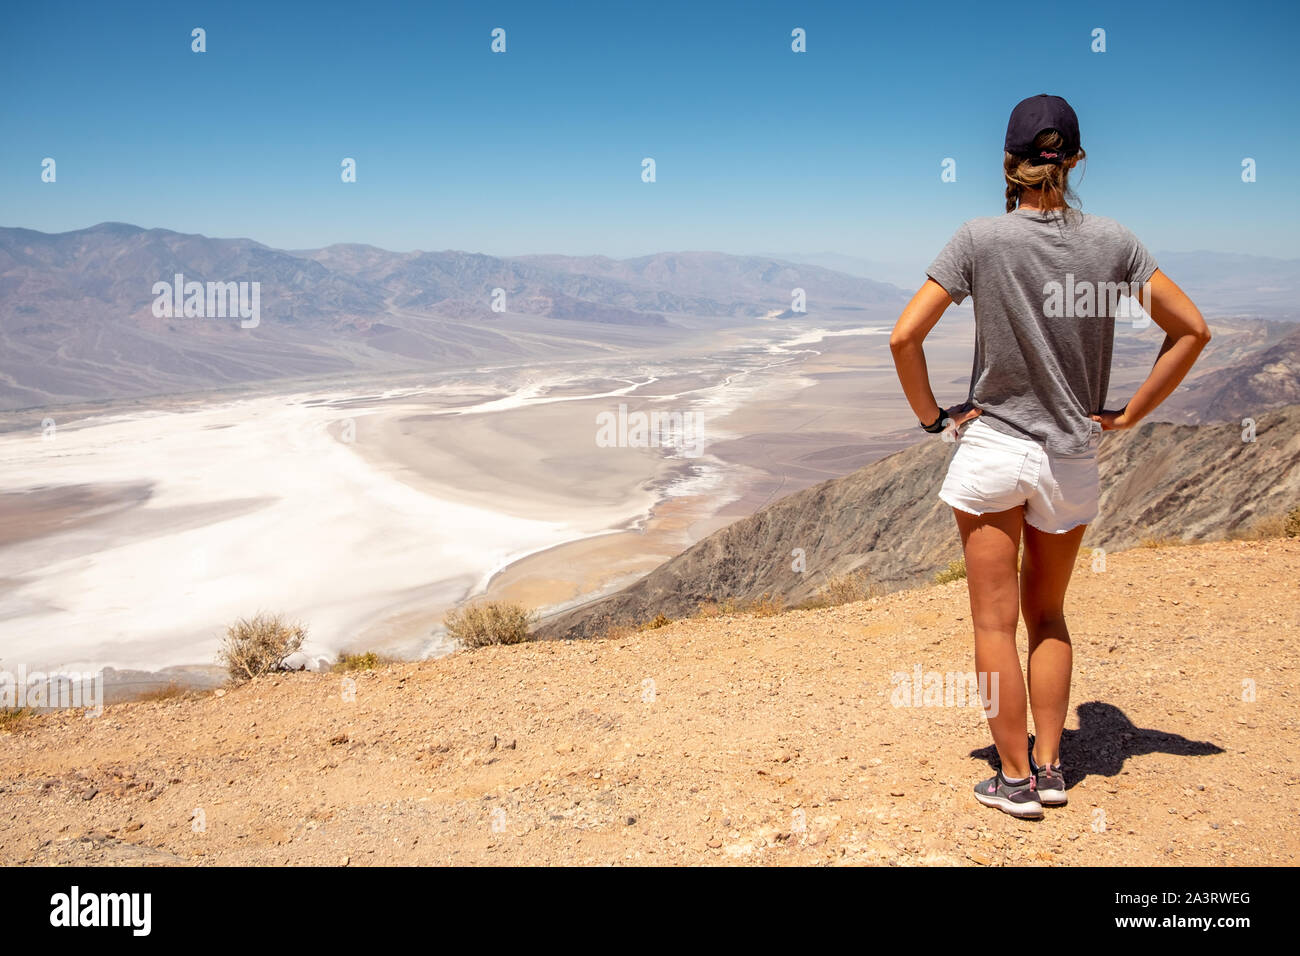 Dante's View, from 11,000' Telescope Peak to -281' Badwater Basin. Death Valley National Park, California, USA Stock Photo